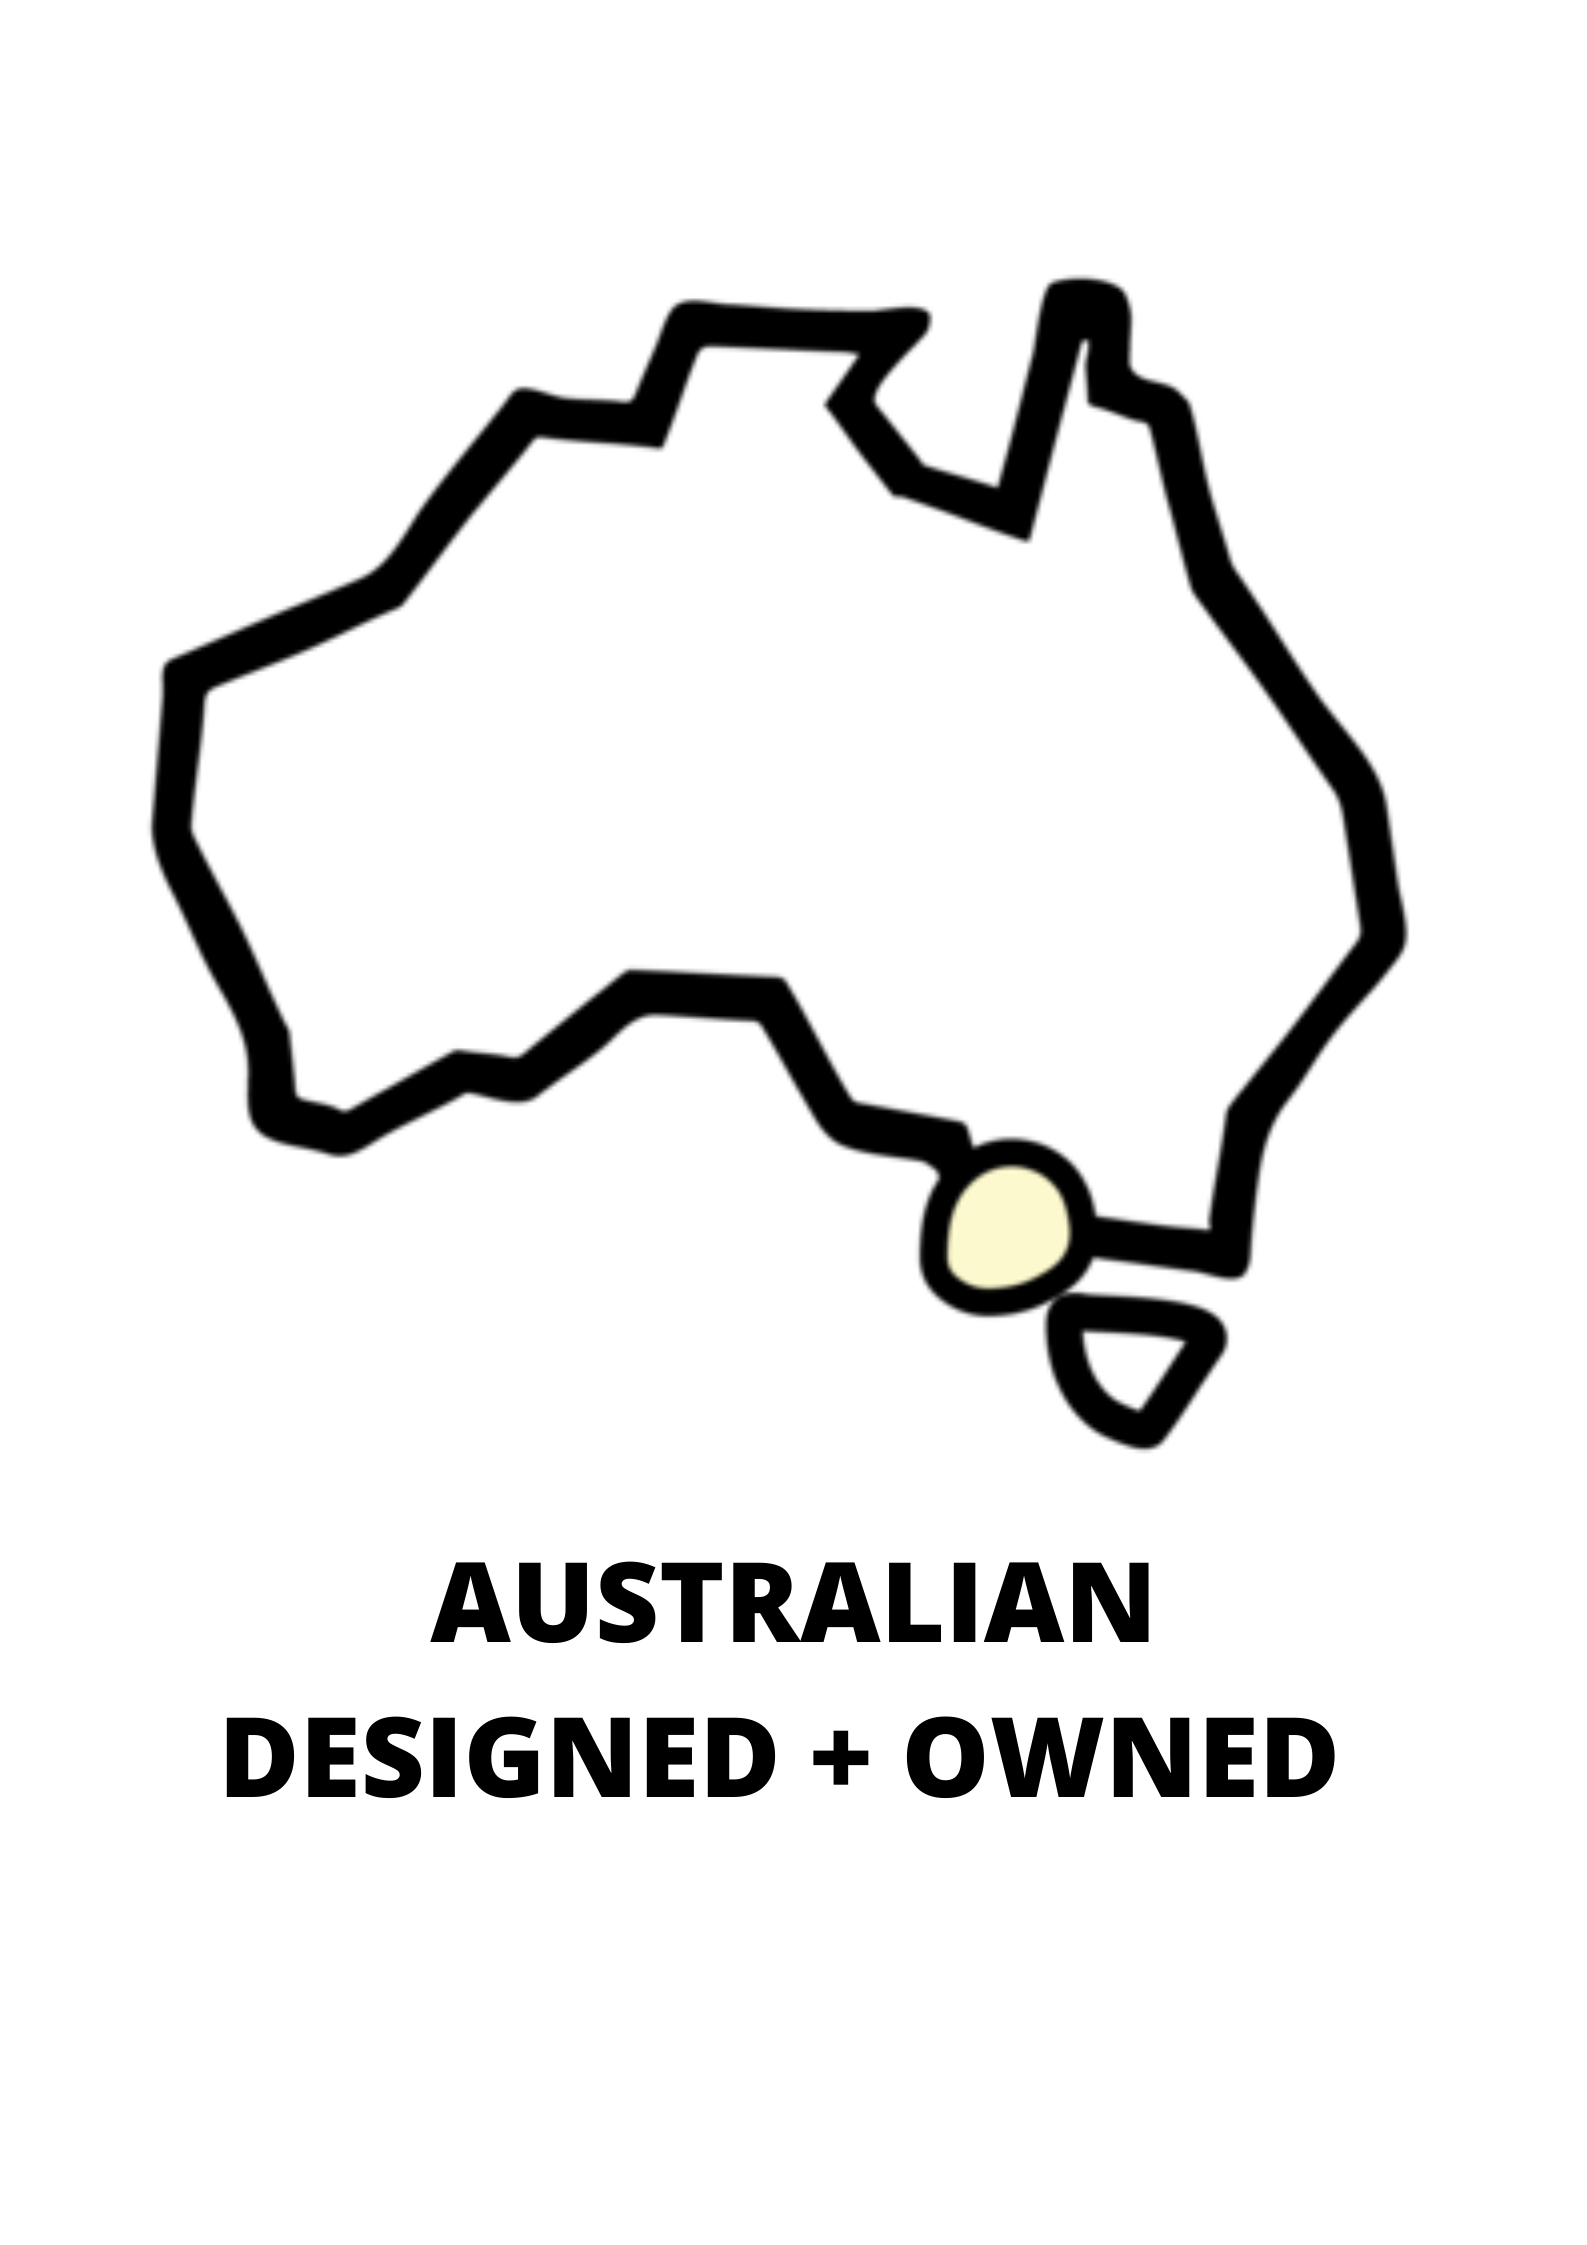 Australian designed and owned